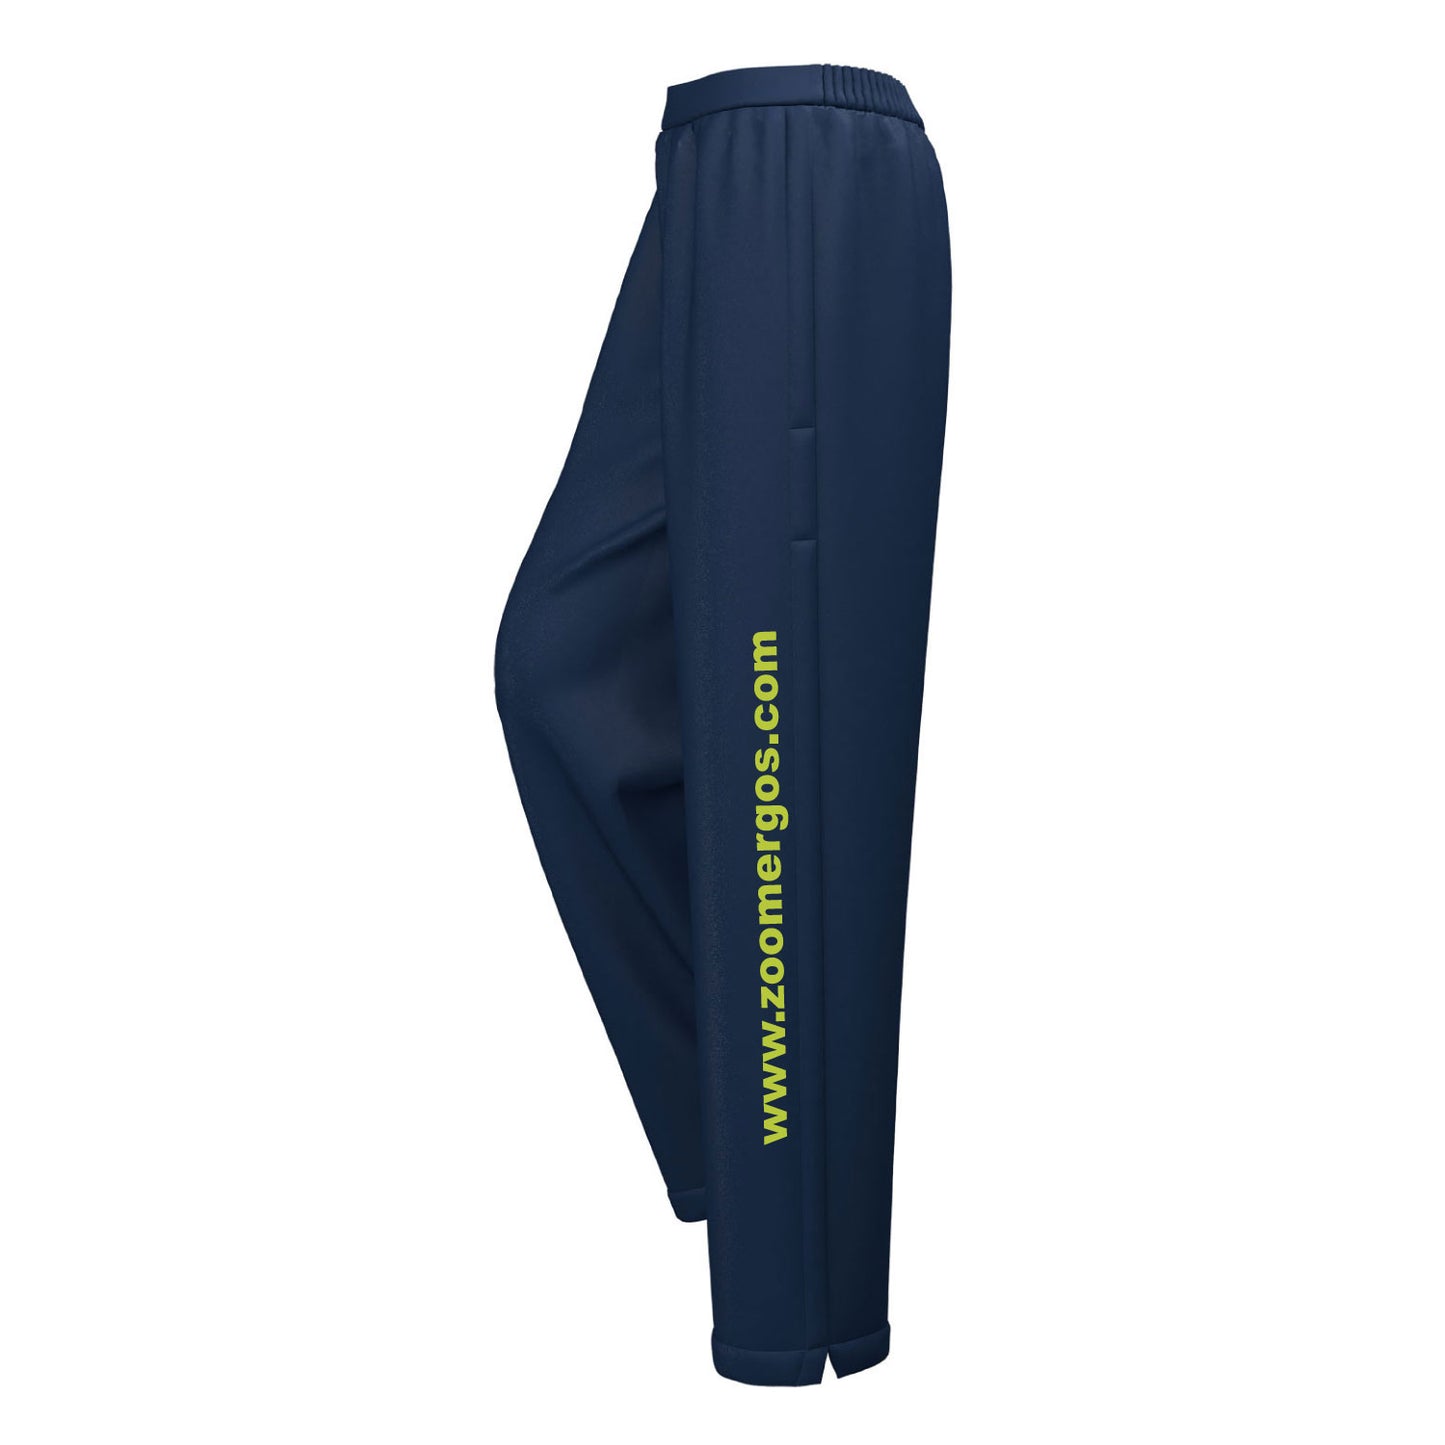 Zoom Ergos Standard Tracksuit Trousers